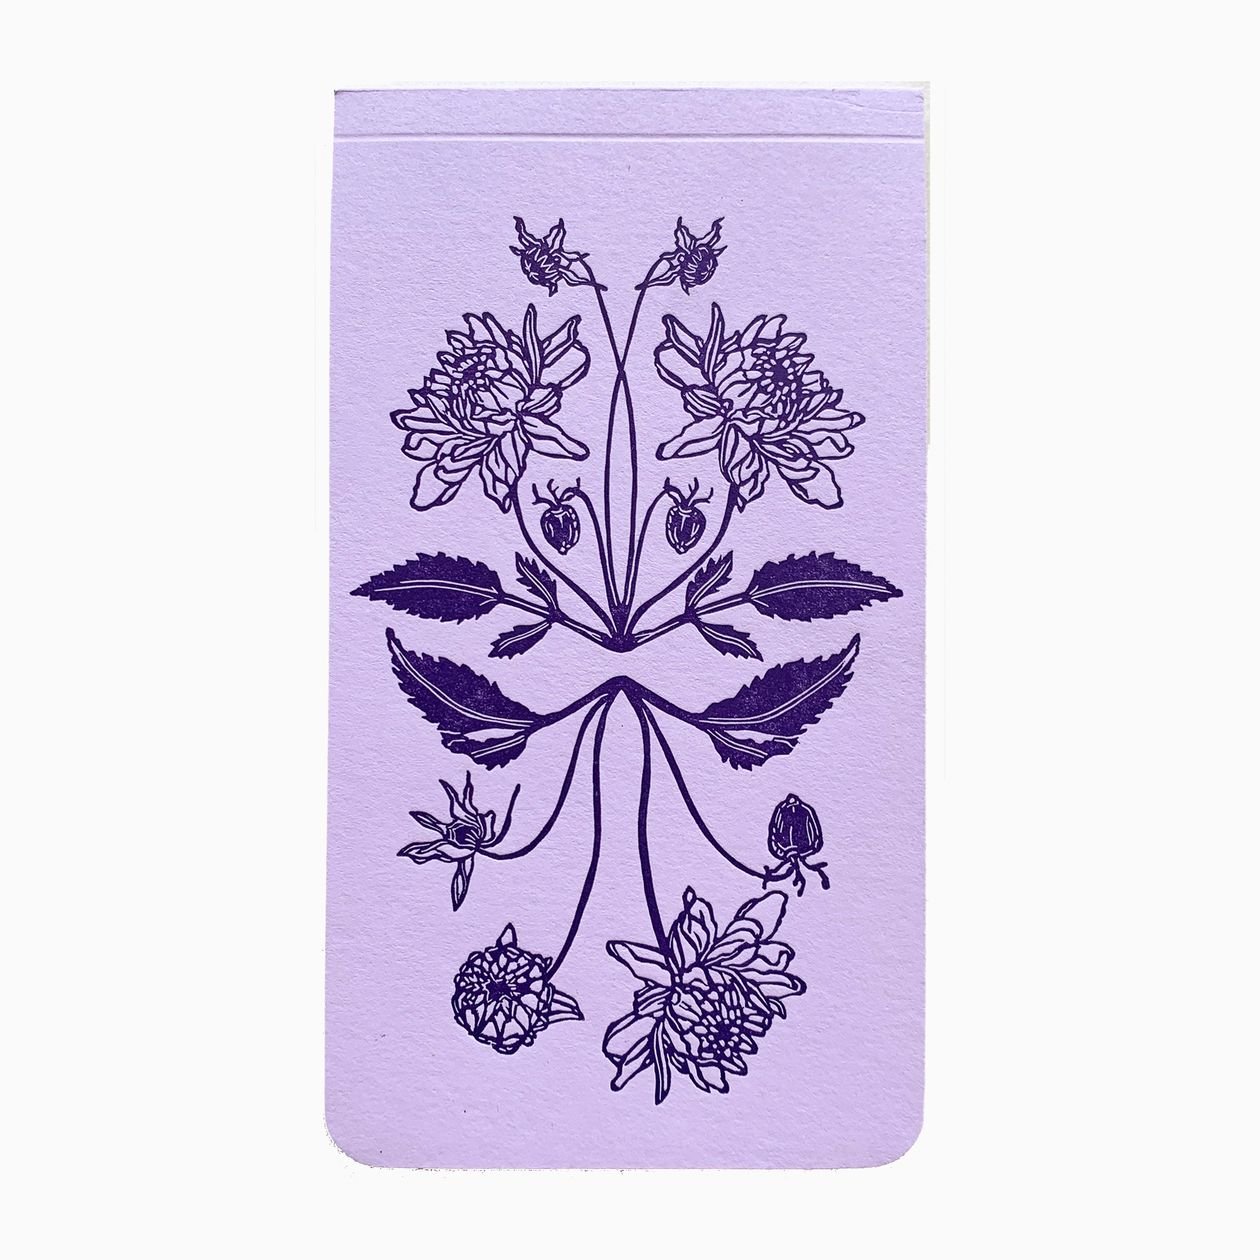 Botanical pattern jotter Notepad - Intrigue Ink Visit Bozeman, Unique Shopping Boutique in Montana, Work from Home Clothes for Women